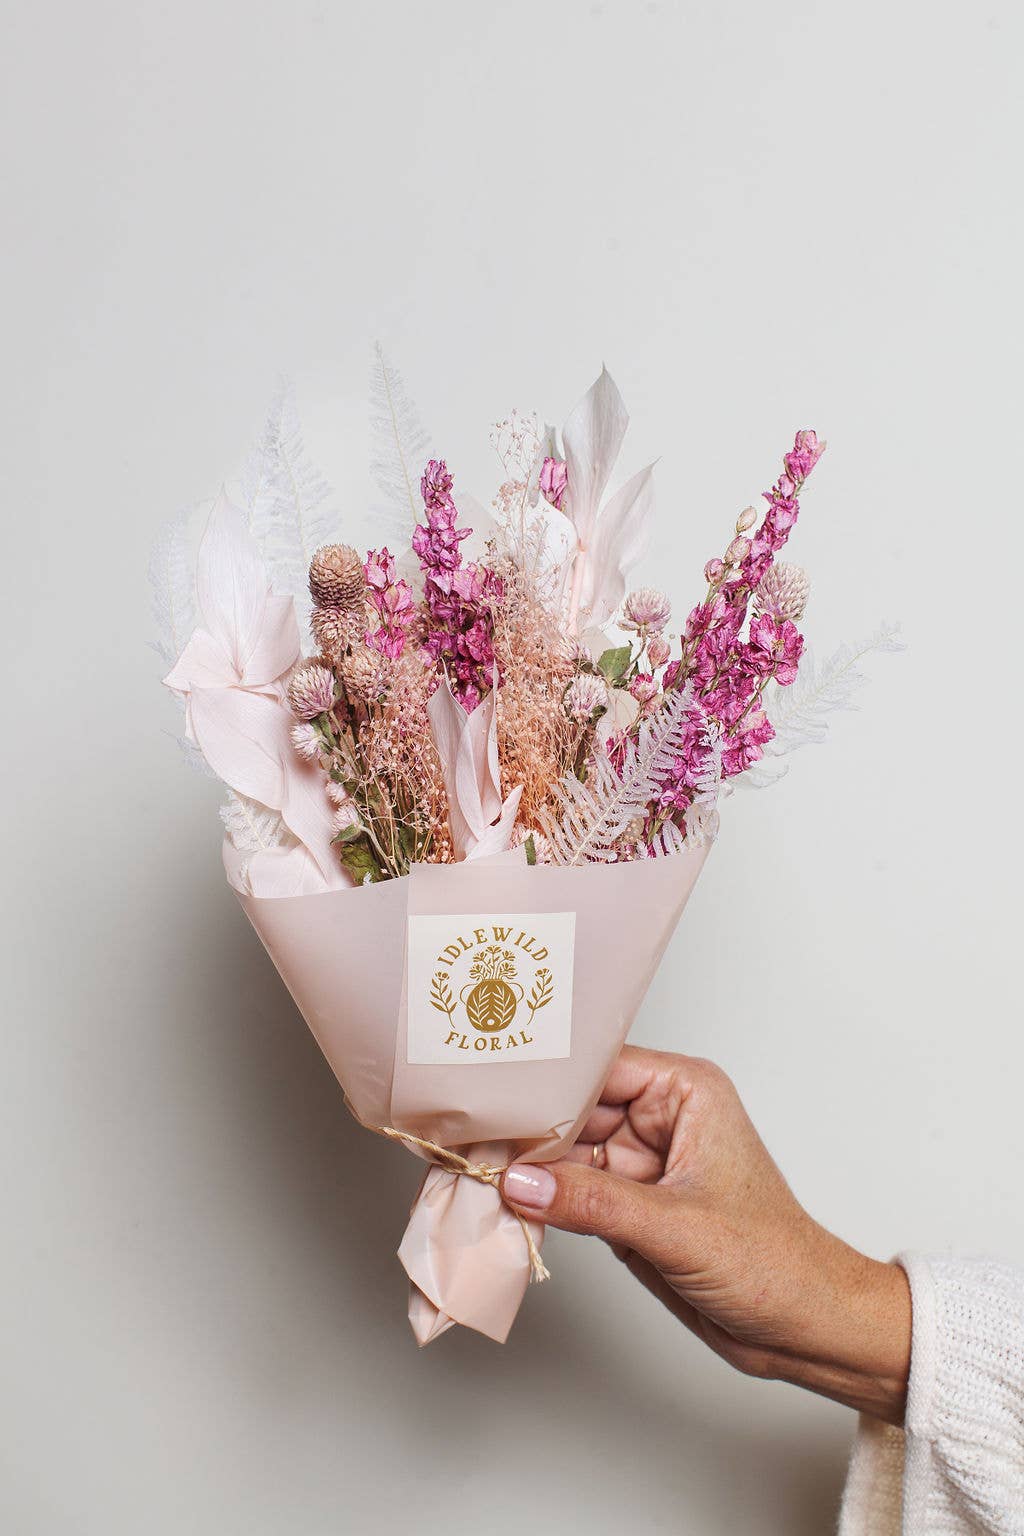 Idlewild Floral Co. - The Sweetheart Bouquet Petite - Eventide Botanical Wellness